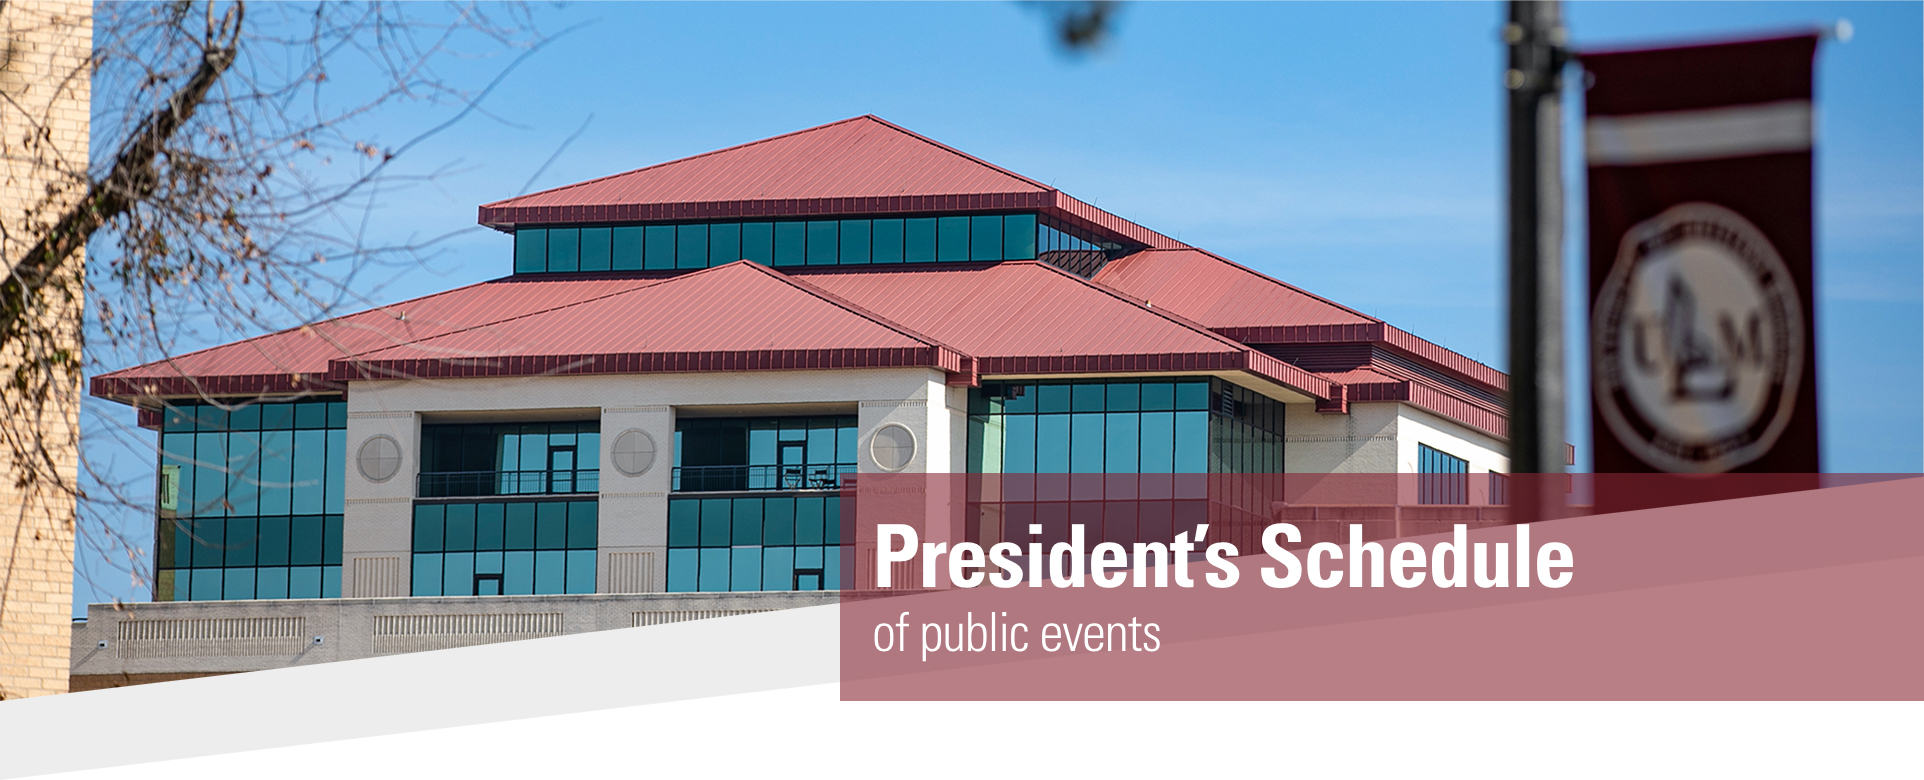 President's Schedule of public events